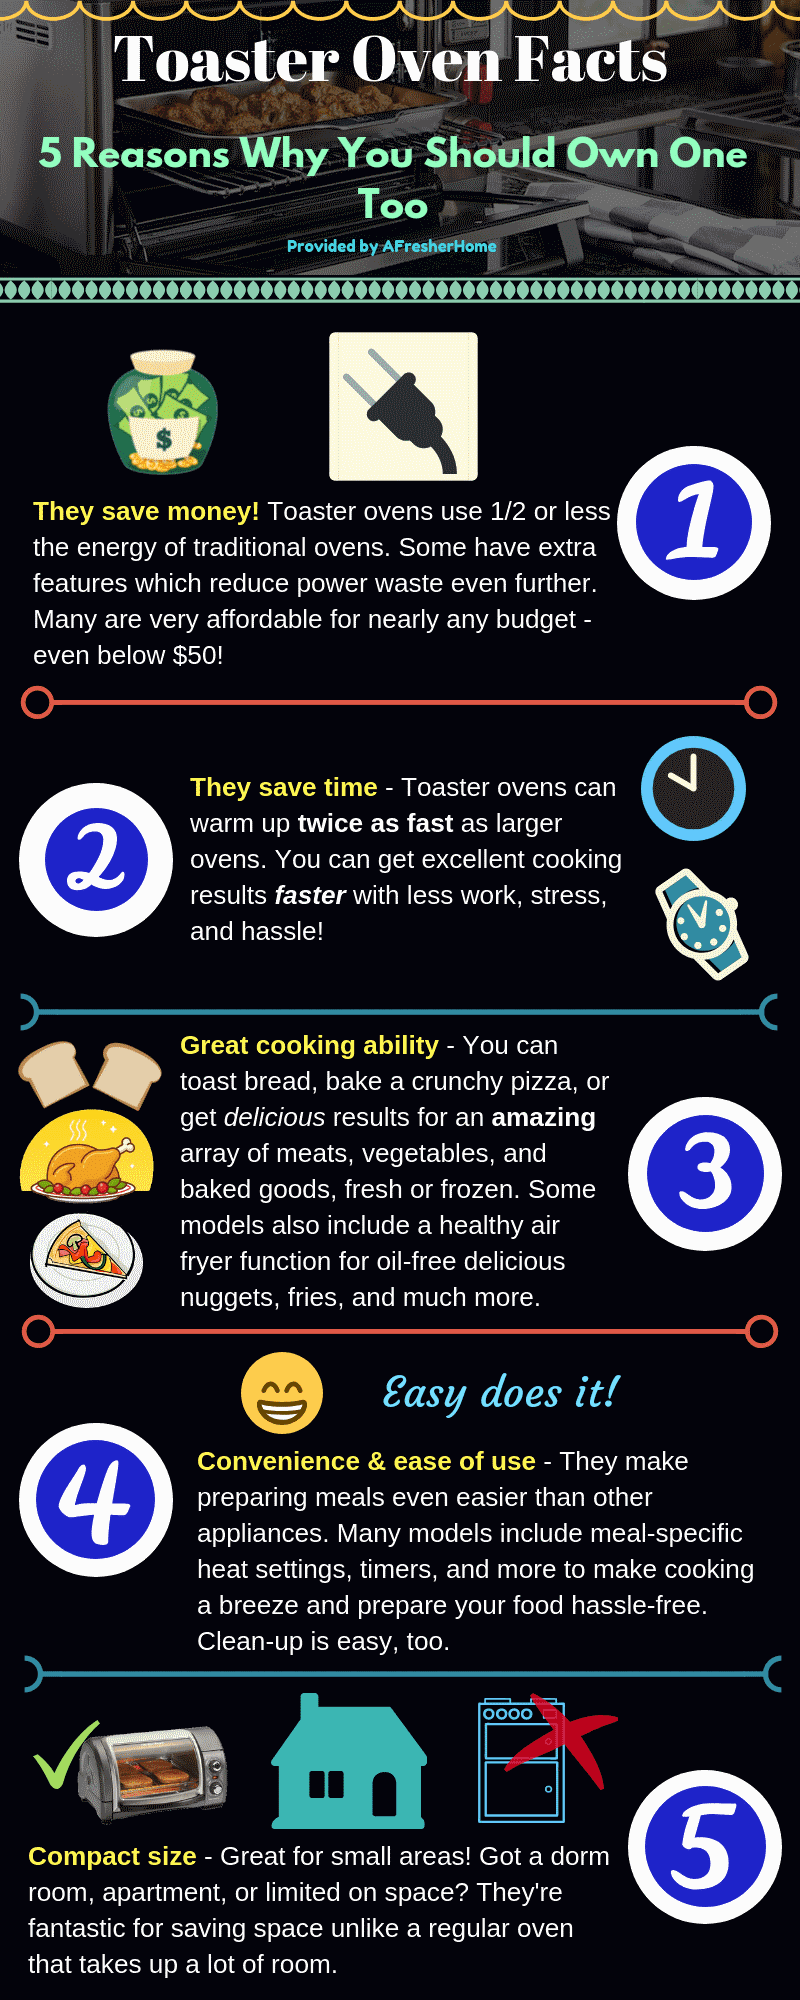 Toaster oven facts infographic